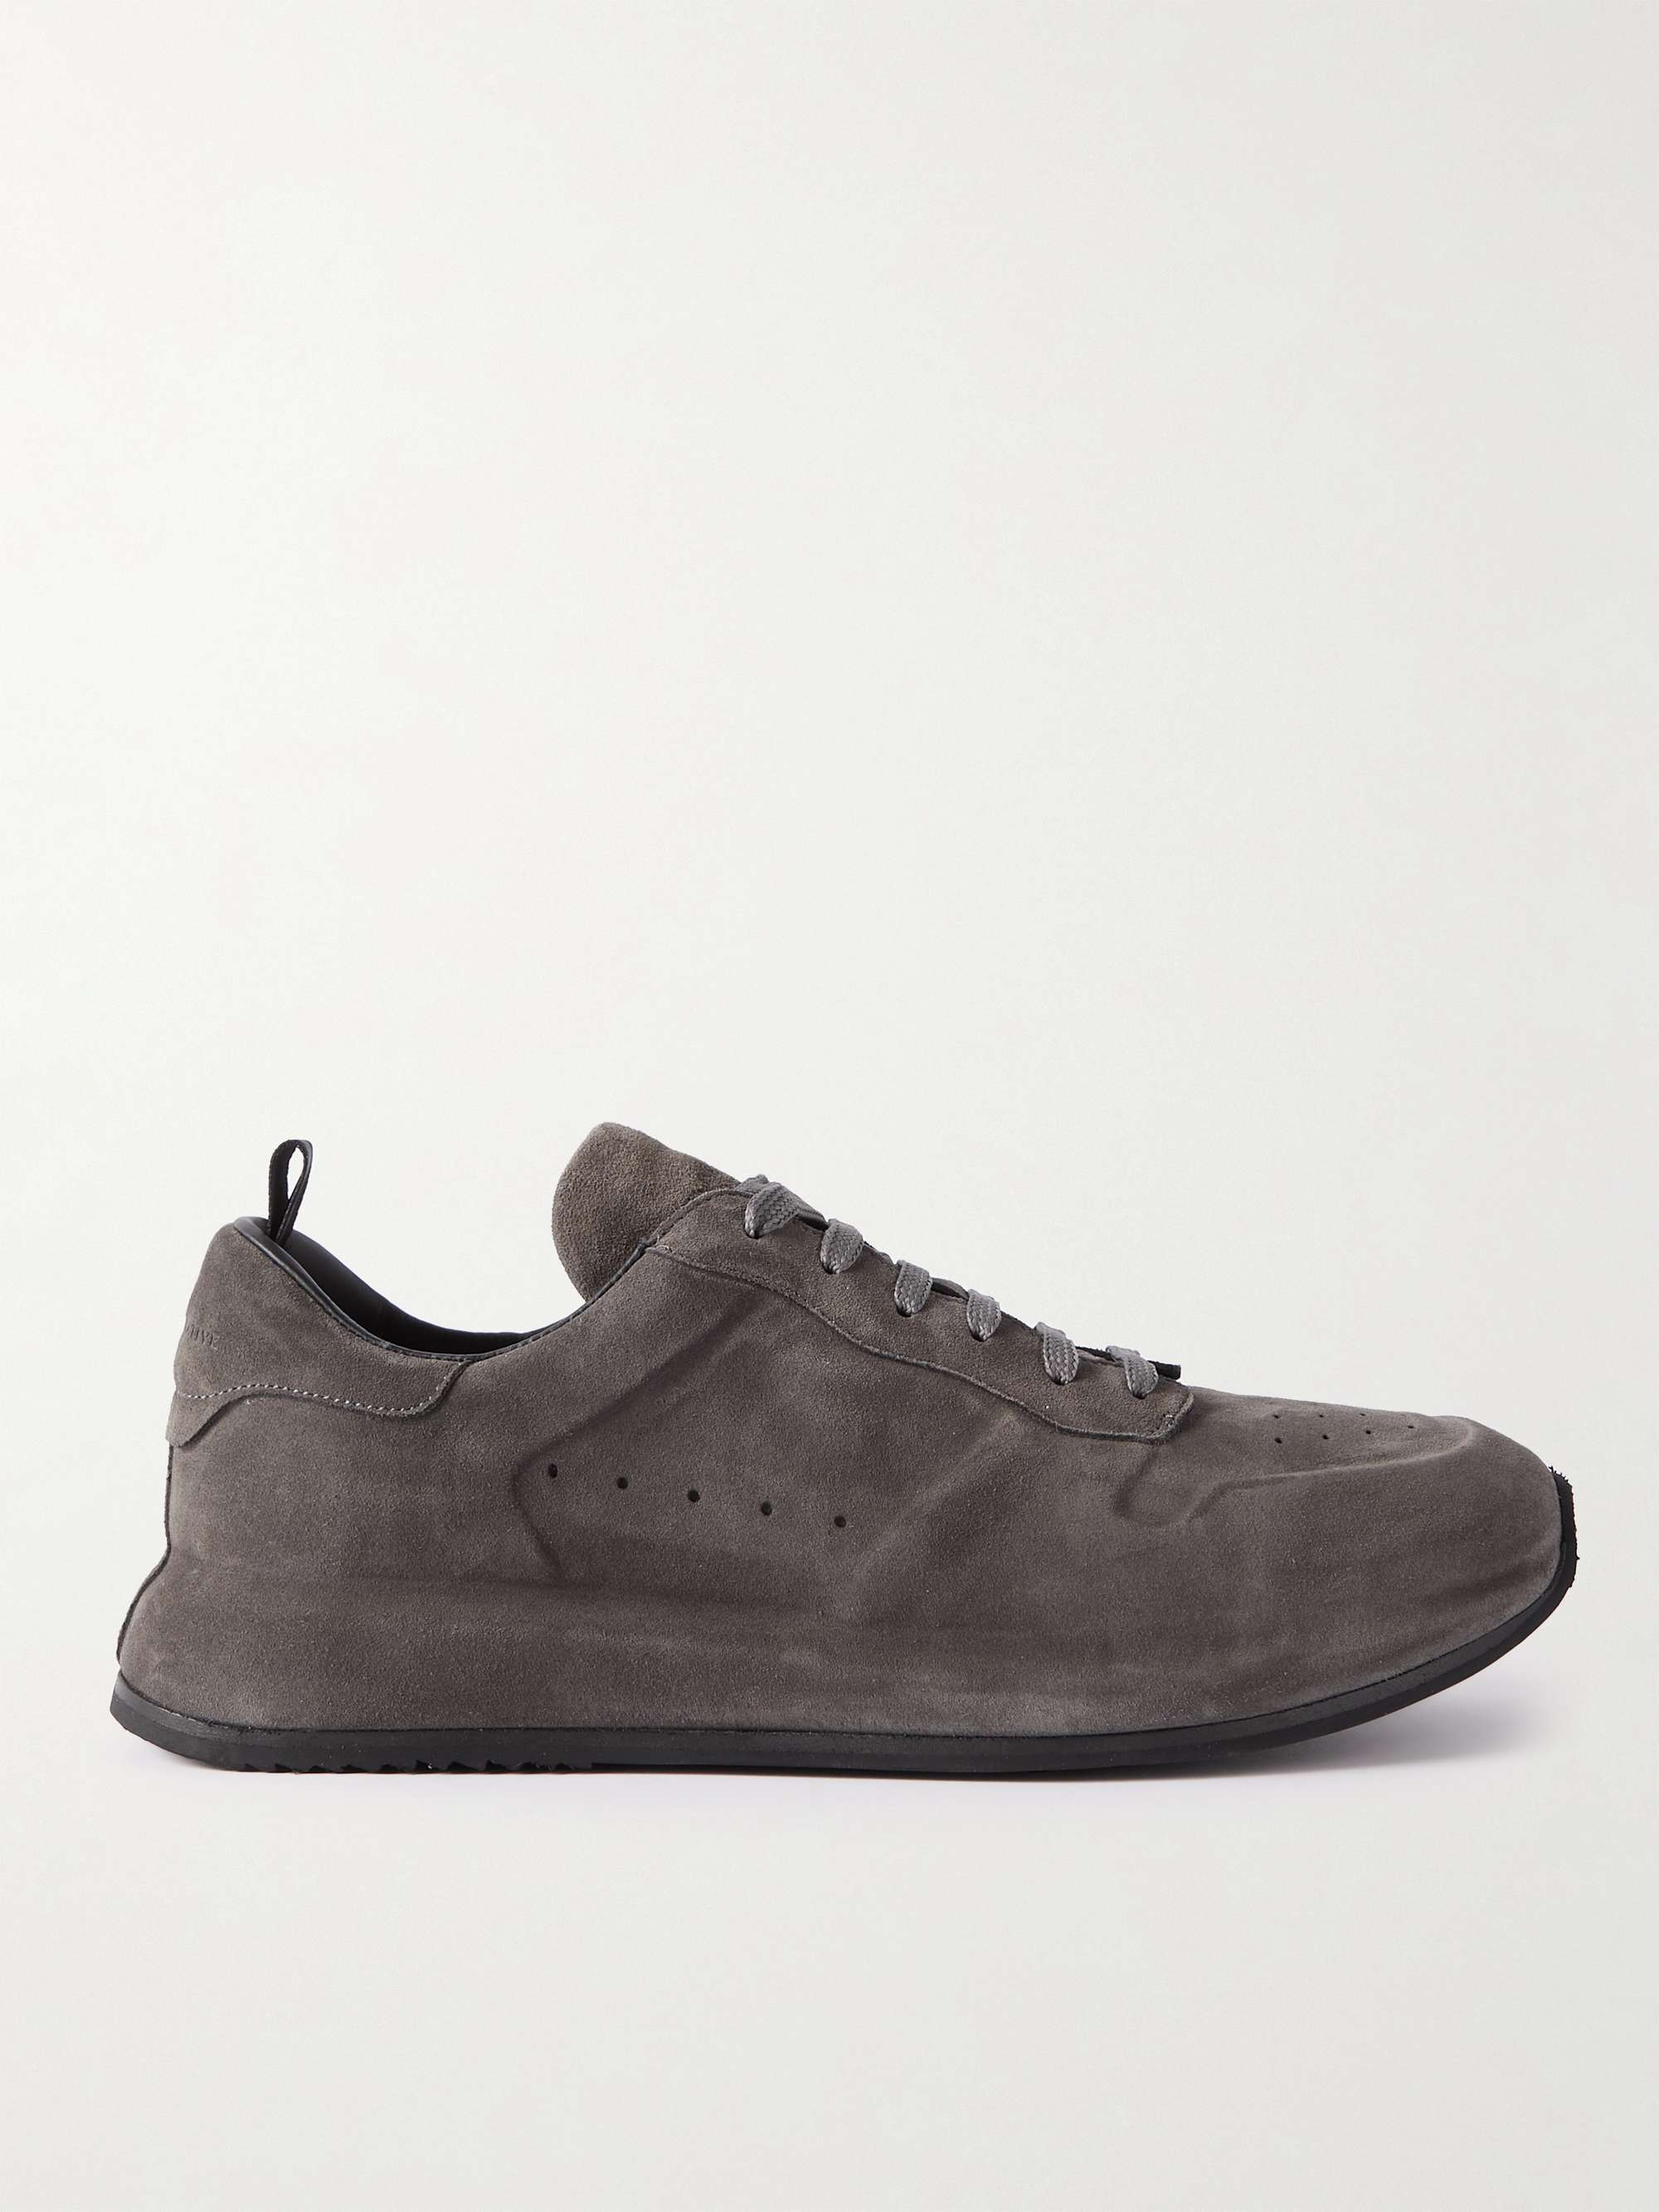 OFFICINE CREATIVE Race Lux Leather Sneakers